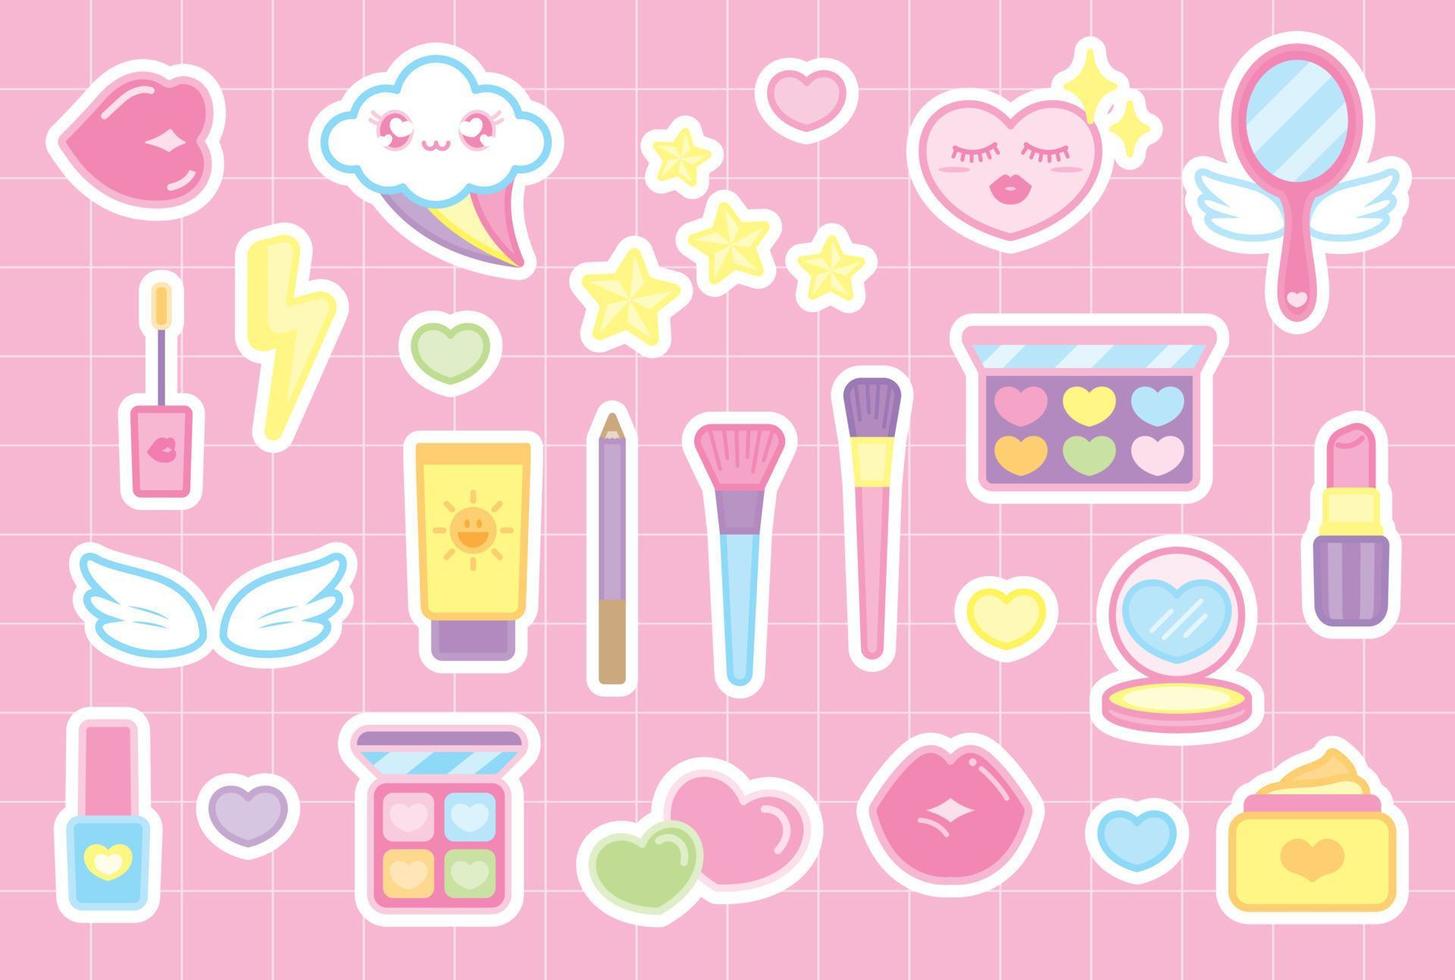 https://static.vecteezy.com/system/resources/previews/010/788/773/non_2x/cute-girly-cosmetics-and-kawaii-stuff-graphic-element-sticker-illustration-on-sweet-pastel-pink-grid-pattern-background-vector.jpg